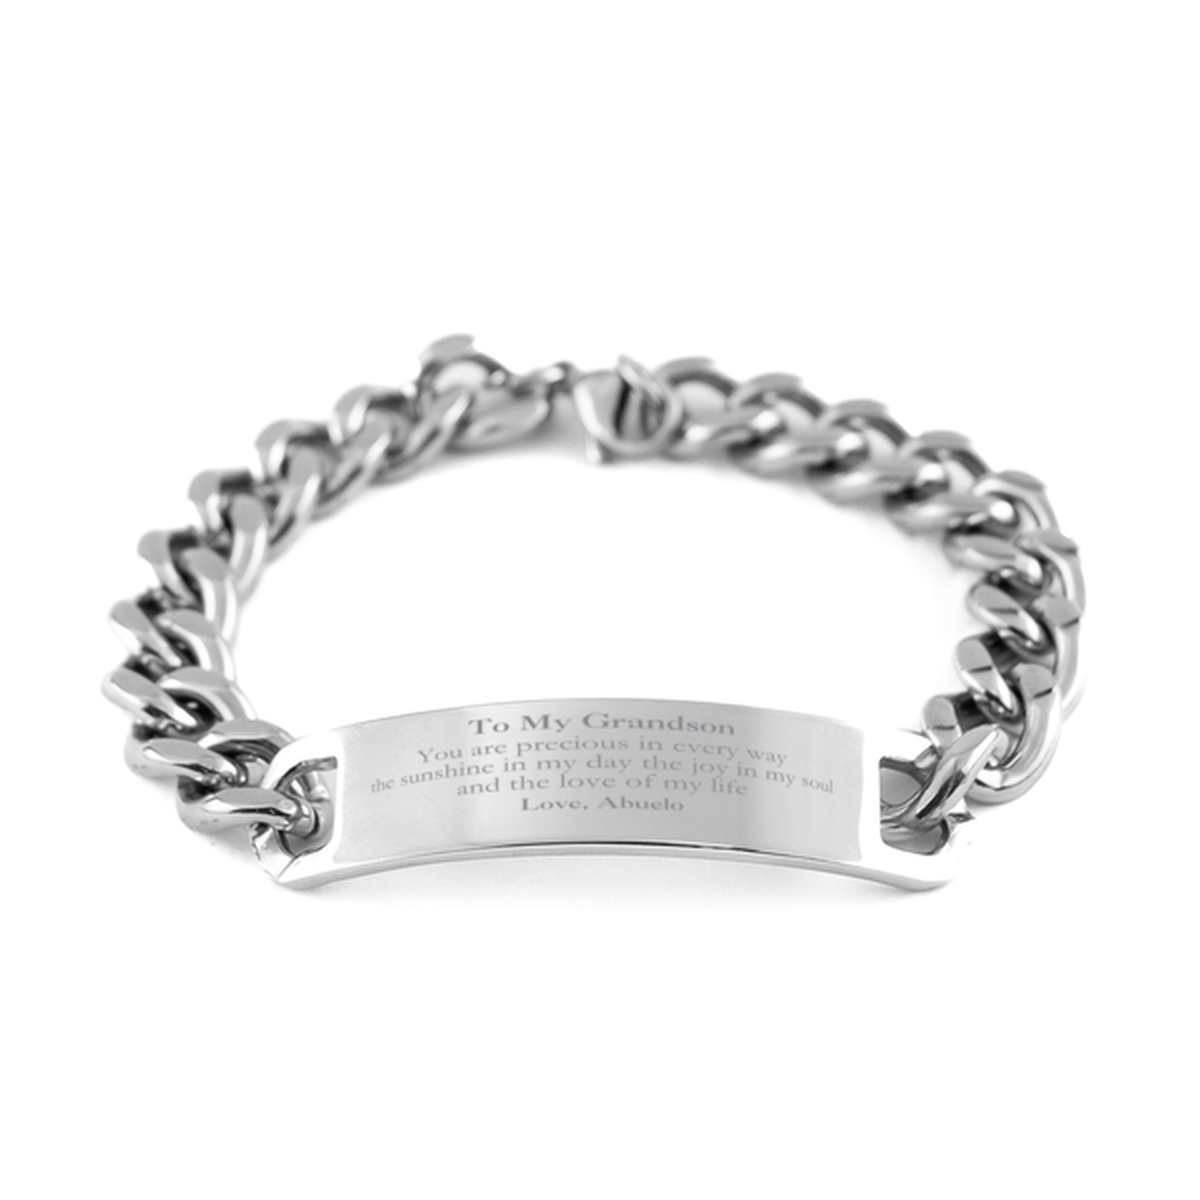 Graduation Gifts for Grandson Cuban Chain Stainless Steel Bracelet Present from Abuelo, Christmas Grandson Birthday Gifts Grandson You are precious in every way the sunshine in my day. Love, Abuelo